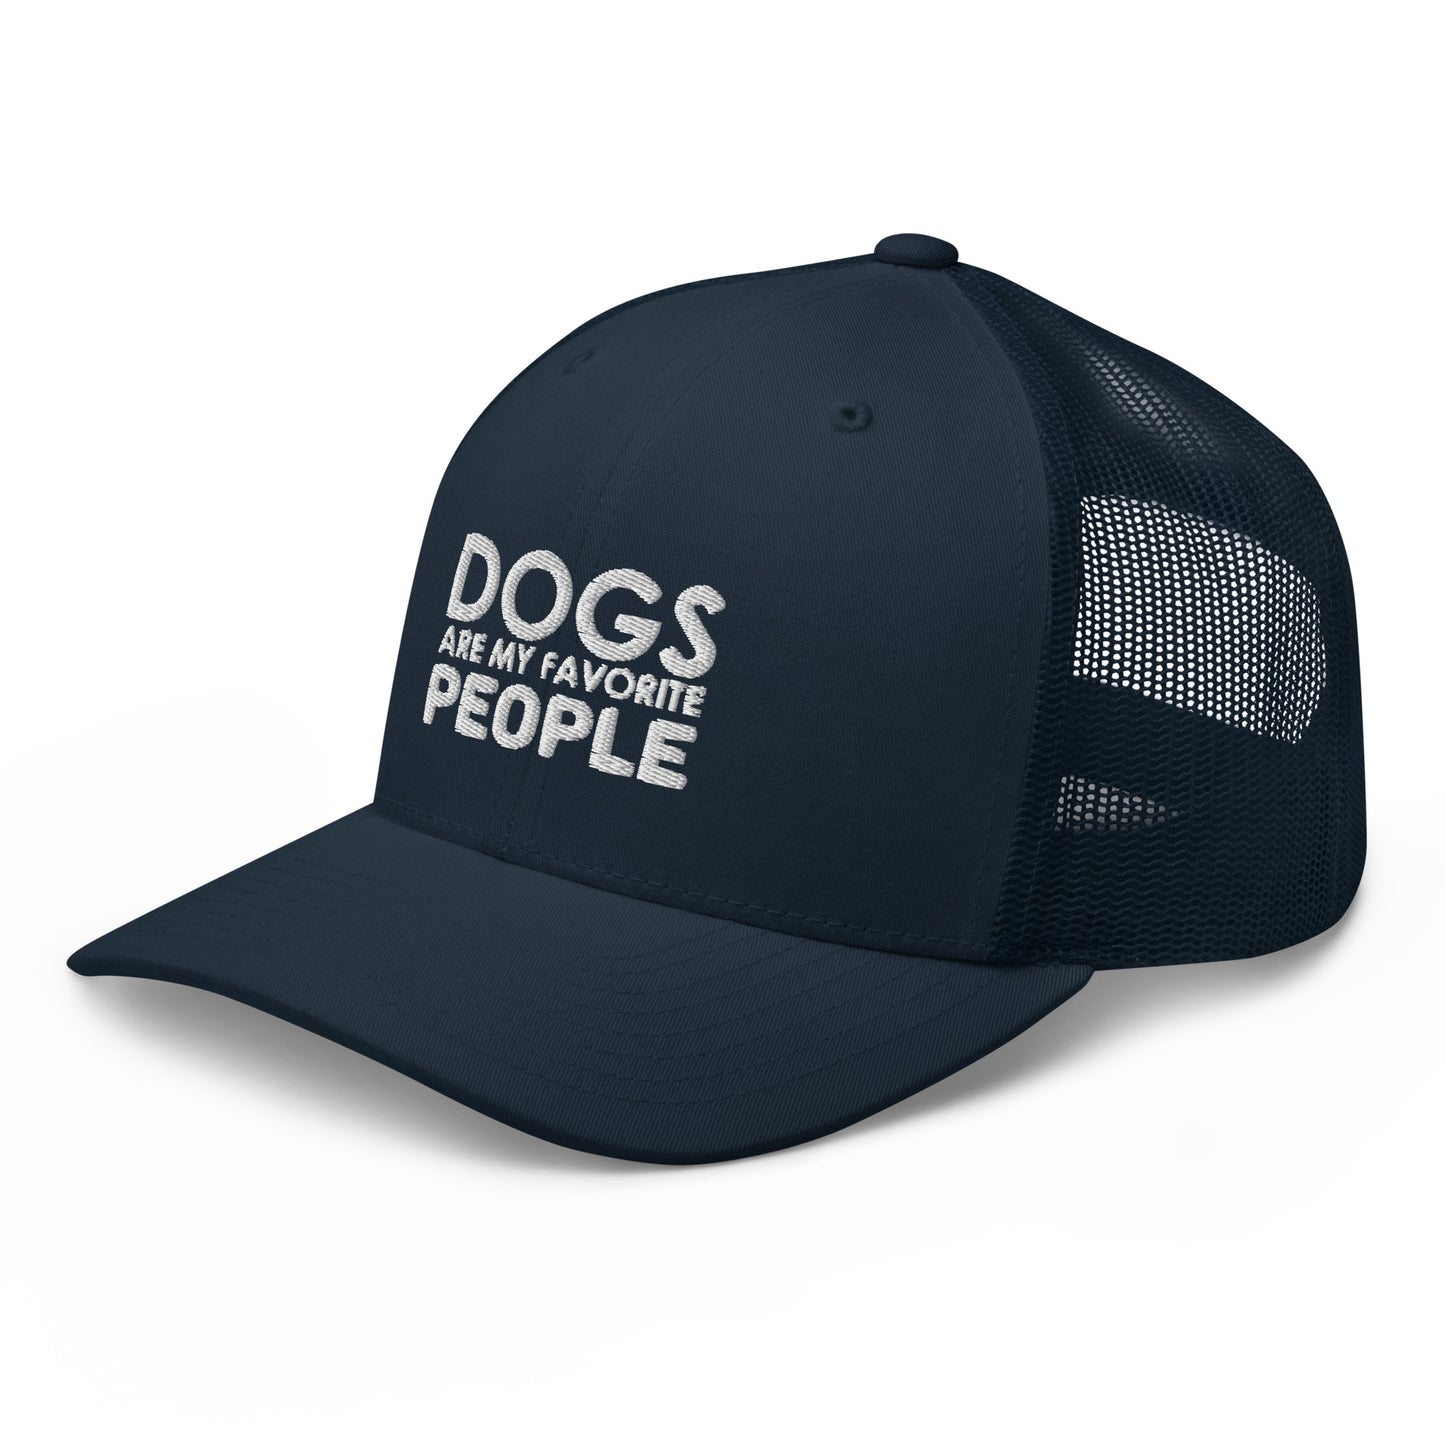 Dogs Are My Favorite People Trucker Cap